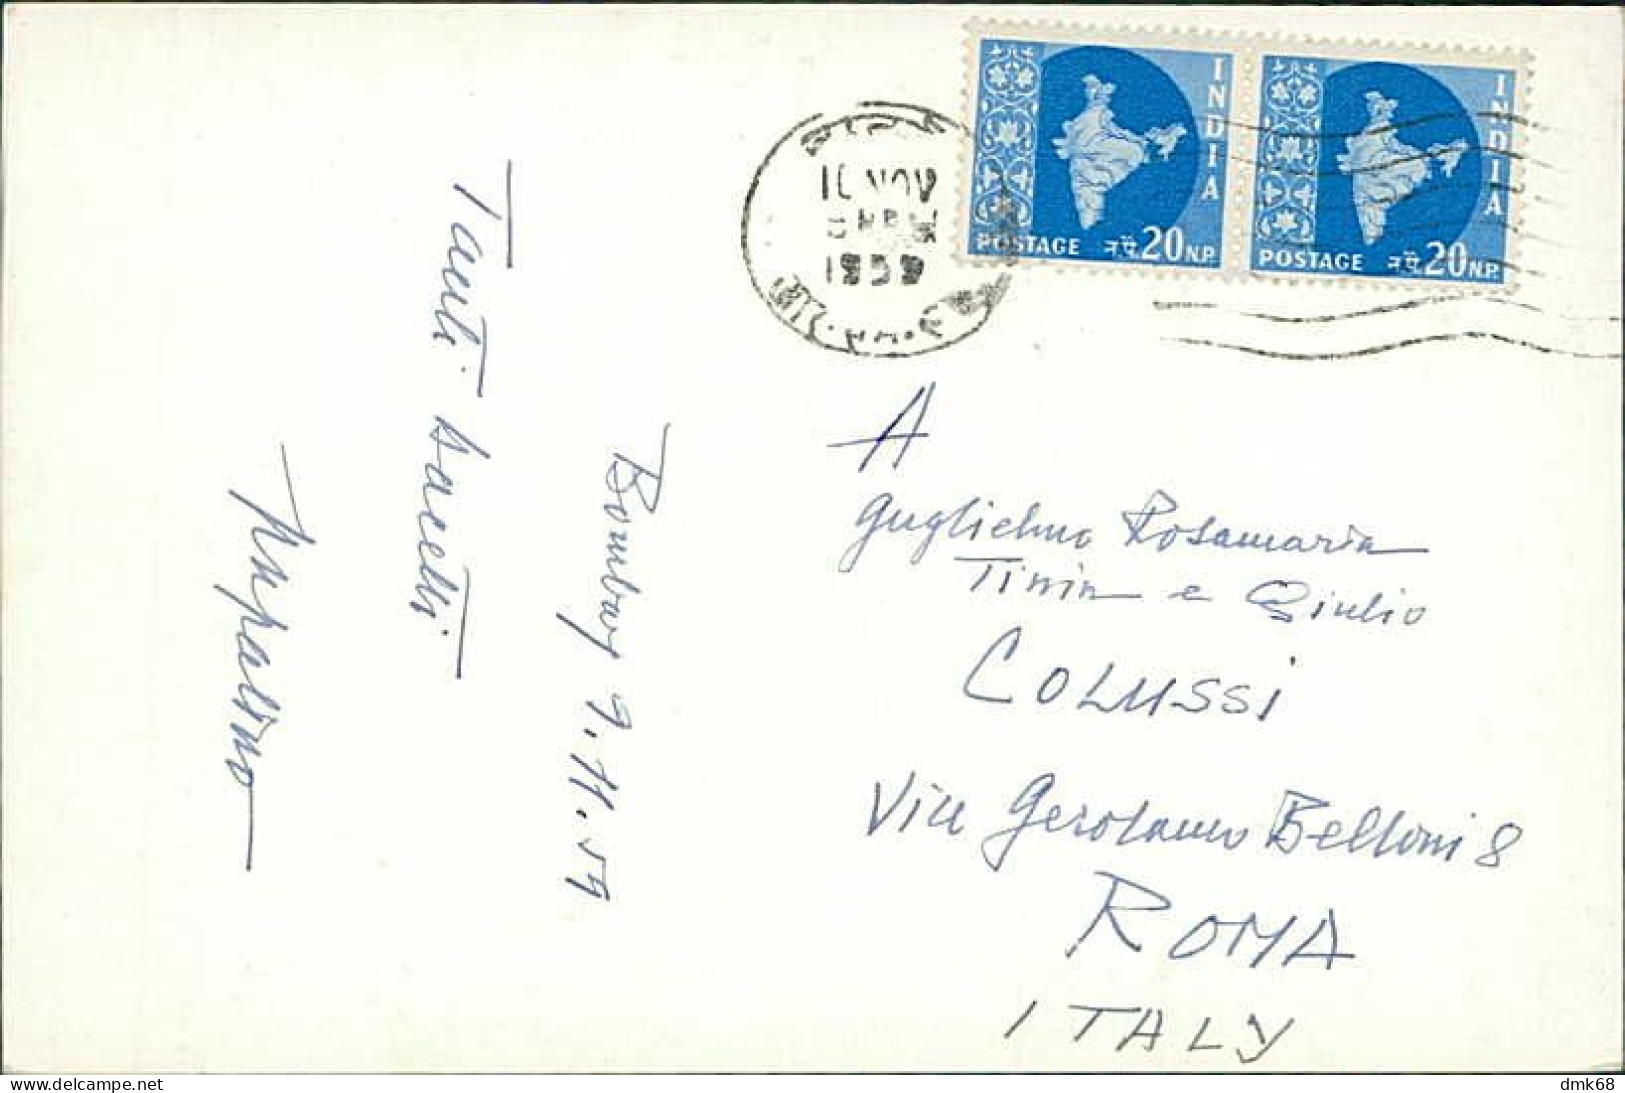 INDIA - GATEWAY OF INDIA - BOMBAY  - RPPC POSTCARD - MAILED 1959 / STAMPS (18376) - India